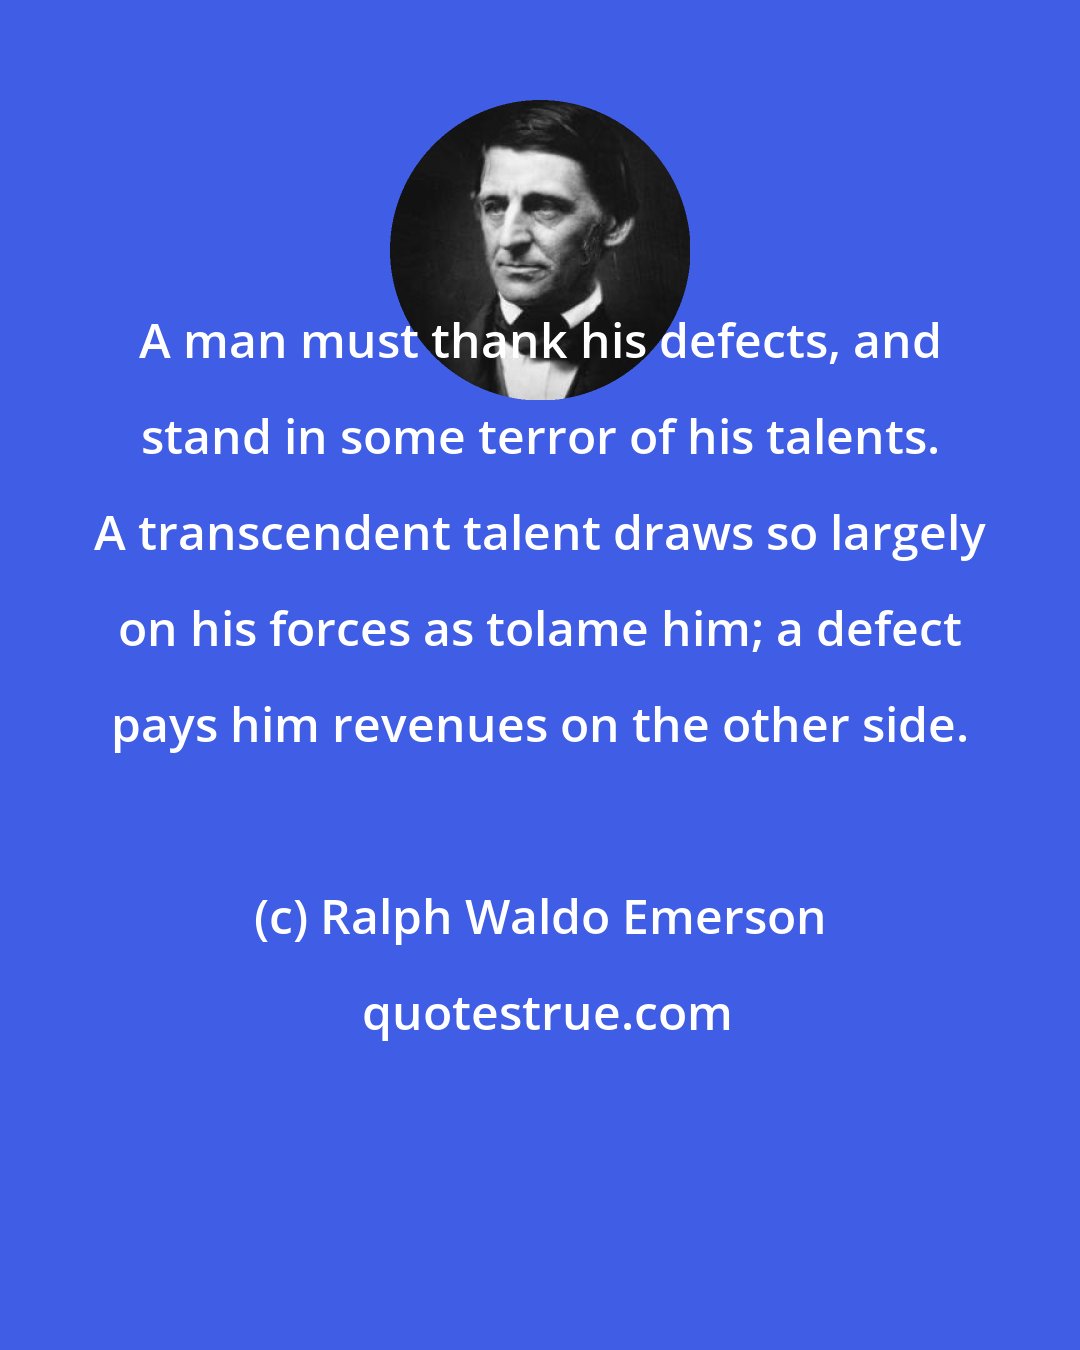 Ralph Waldo Emerson: A man must thank his defects, and stand in some terror of his talents. A transcendent talent draws so largely on his forces as tolame him; a defect pays him revenues on the other side.